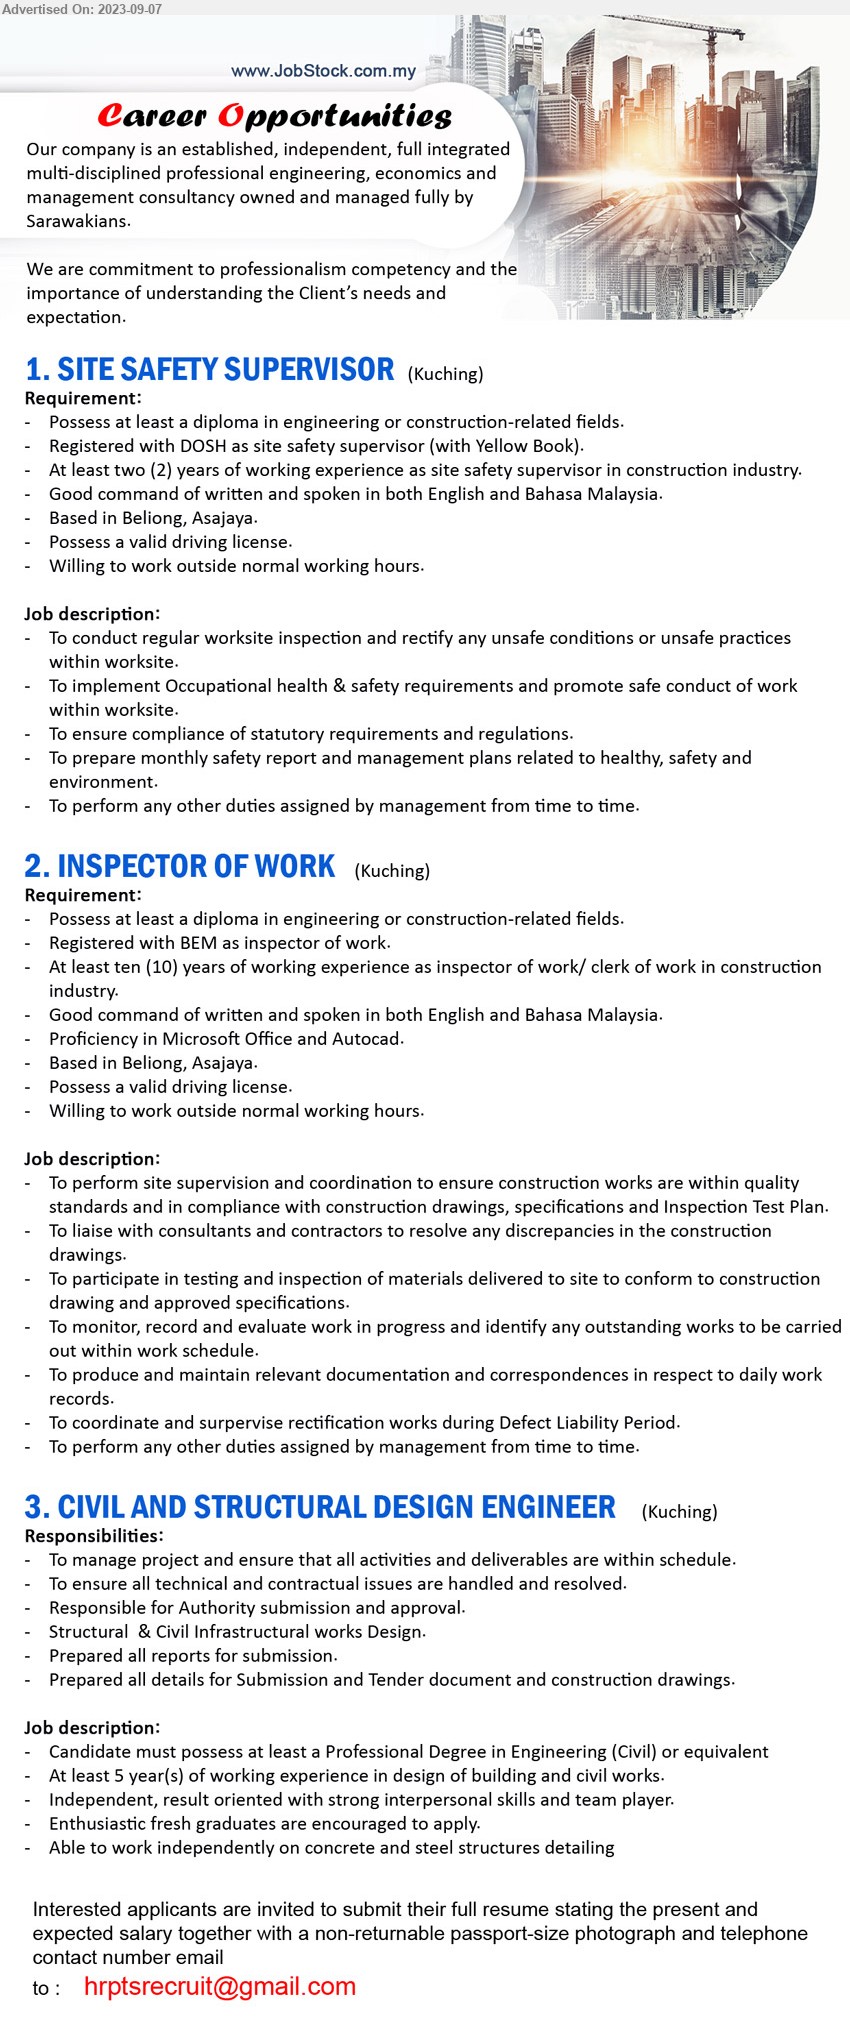 ADVERTISER - 1. SITE SAFETY SUPERVISOR (Kuching), diploma in engineering or construction-related fields, Registered with DOSH as site safety supervisor (with Yellow Book)....
2. INSPECTOR OF WORK (Kuching), Diploma in engineering or construction, Registered with BEM as inspector of work....
3. CIVIL AND STRUCTURAL DESIGN ENGINEER (Kuching), Professional Degree in Engineering (Civil) ,...
Email resume to ...